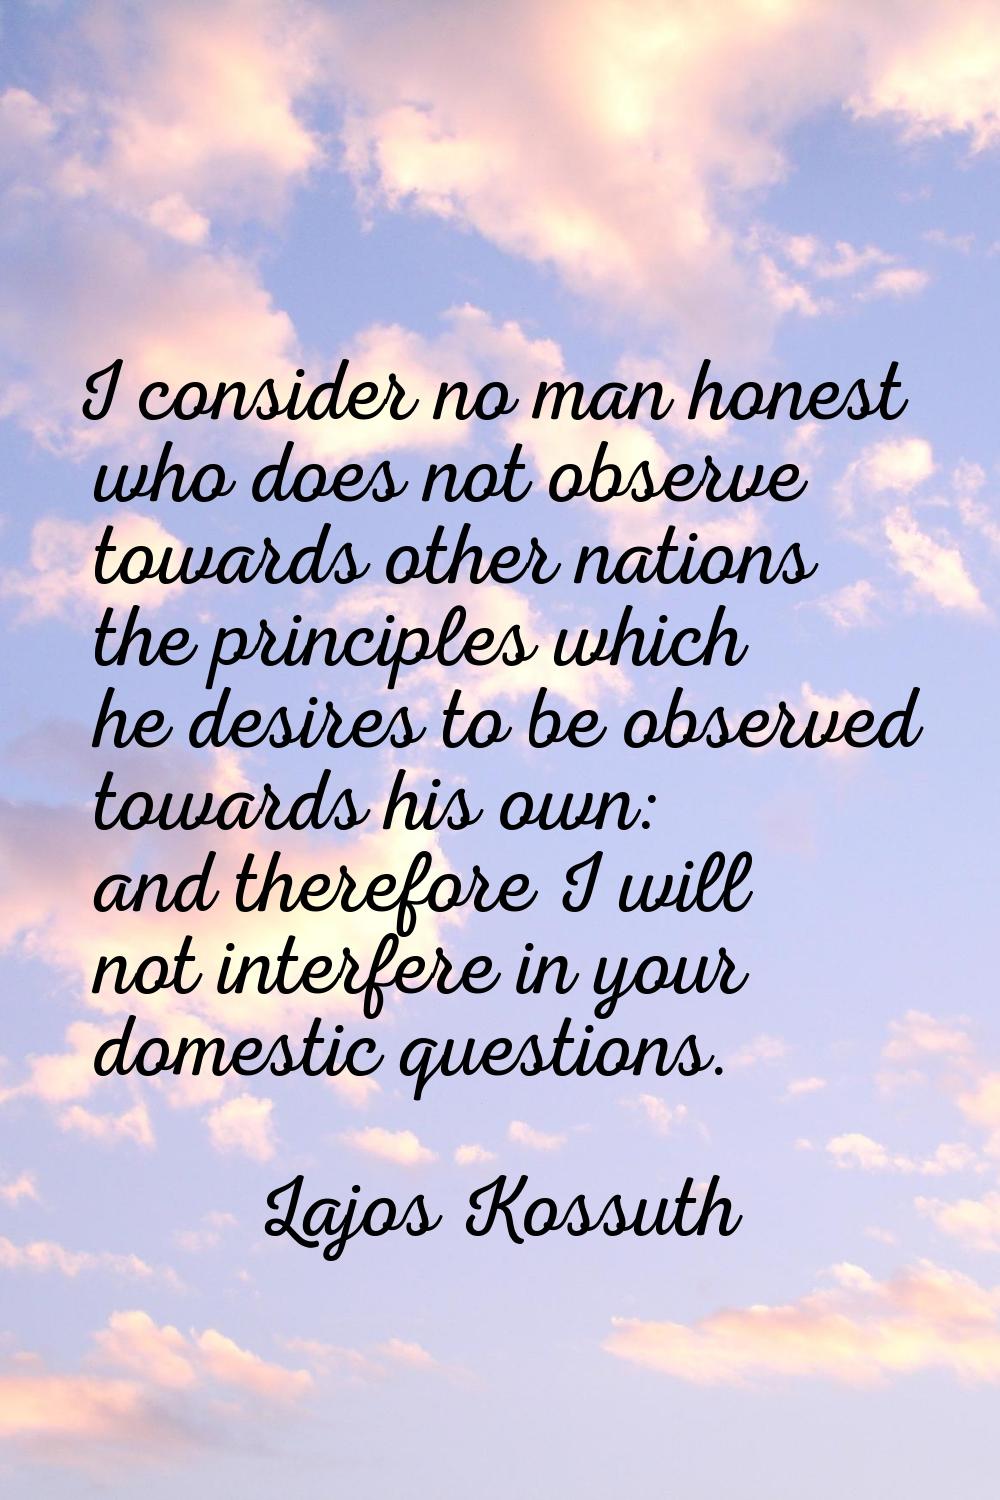 I consider no man honest who does not observe towards other nations the principles which he desires